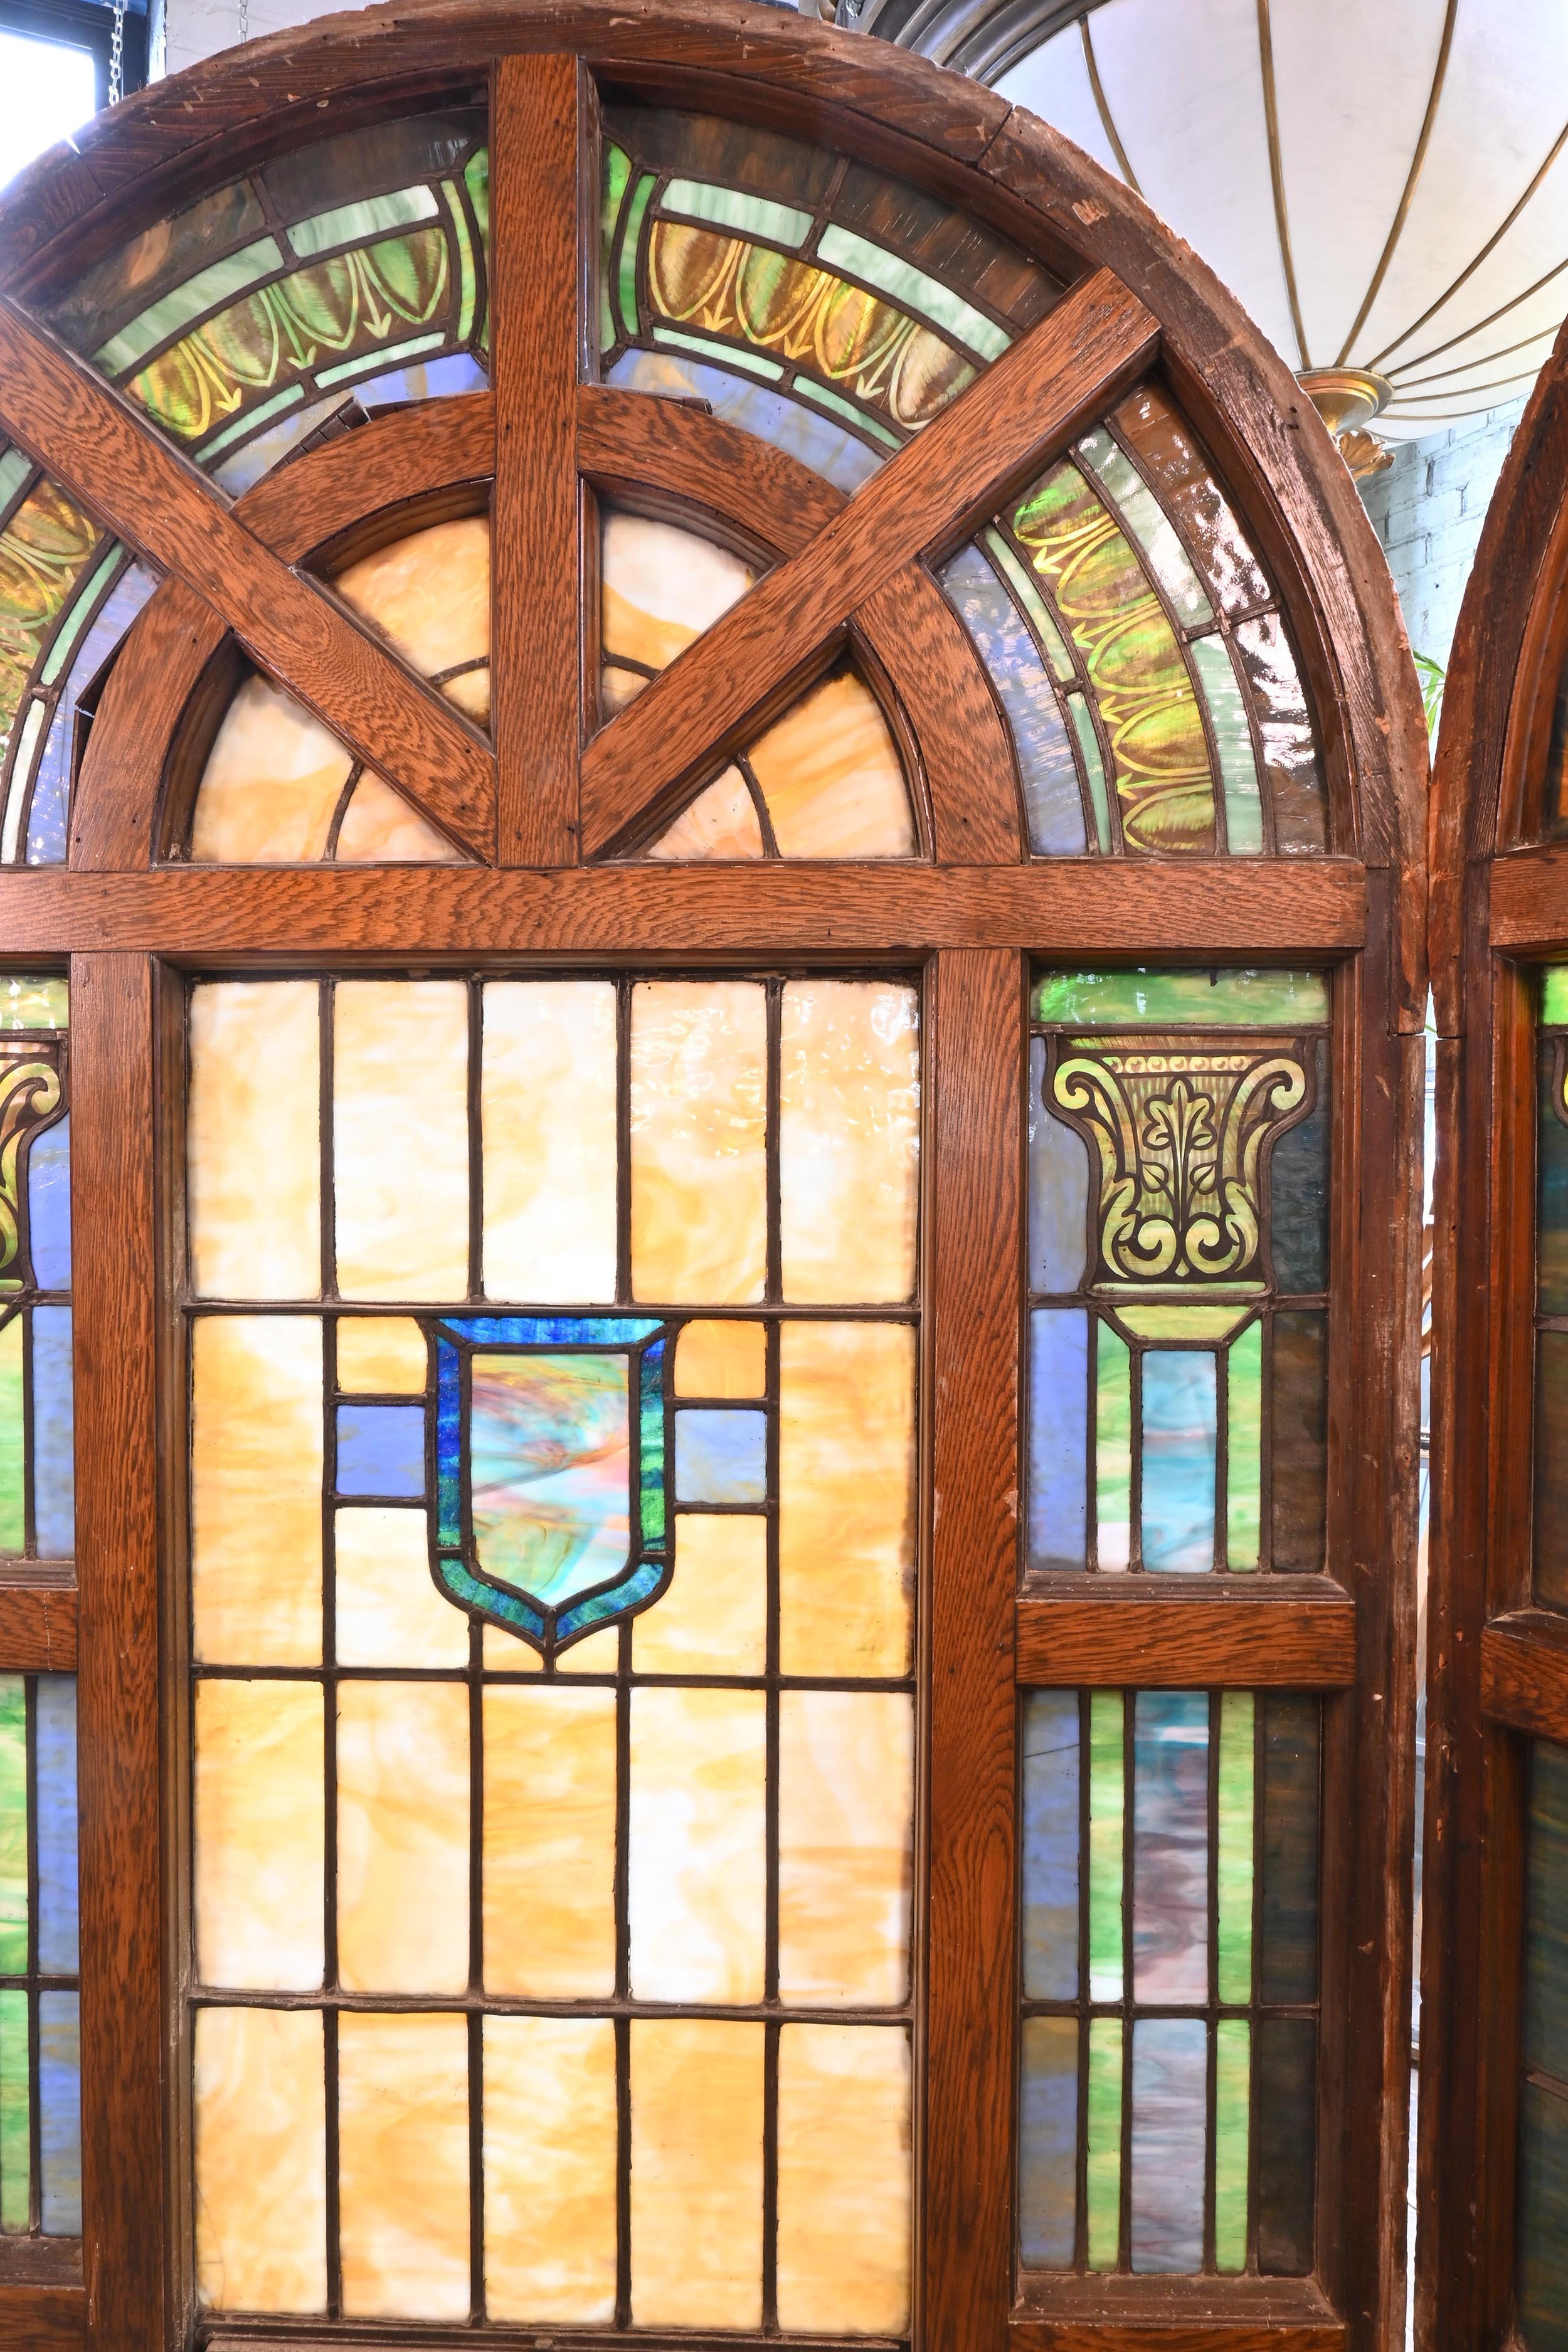 a square stained glass window is divided